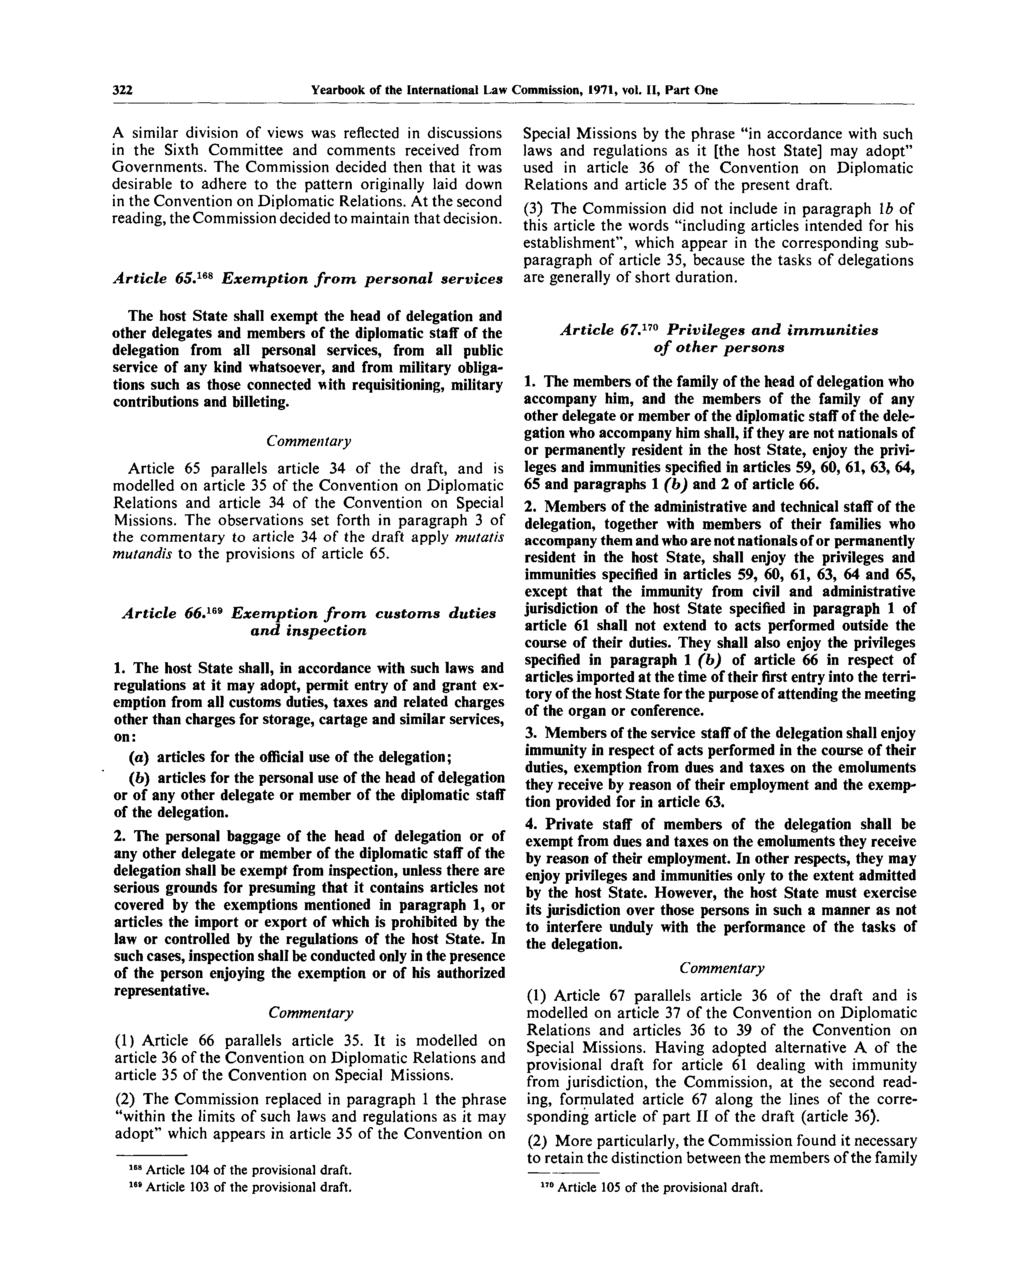 322 Yearbook of the International Law Commission, 1971, vol. II, Part One A similar division of views was reflected in discussions in the Sixth Committee and comments received from Governments.